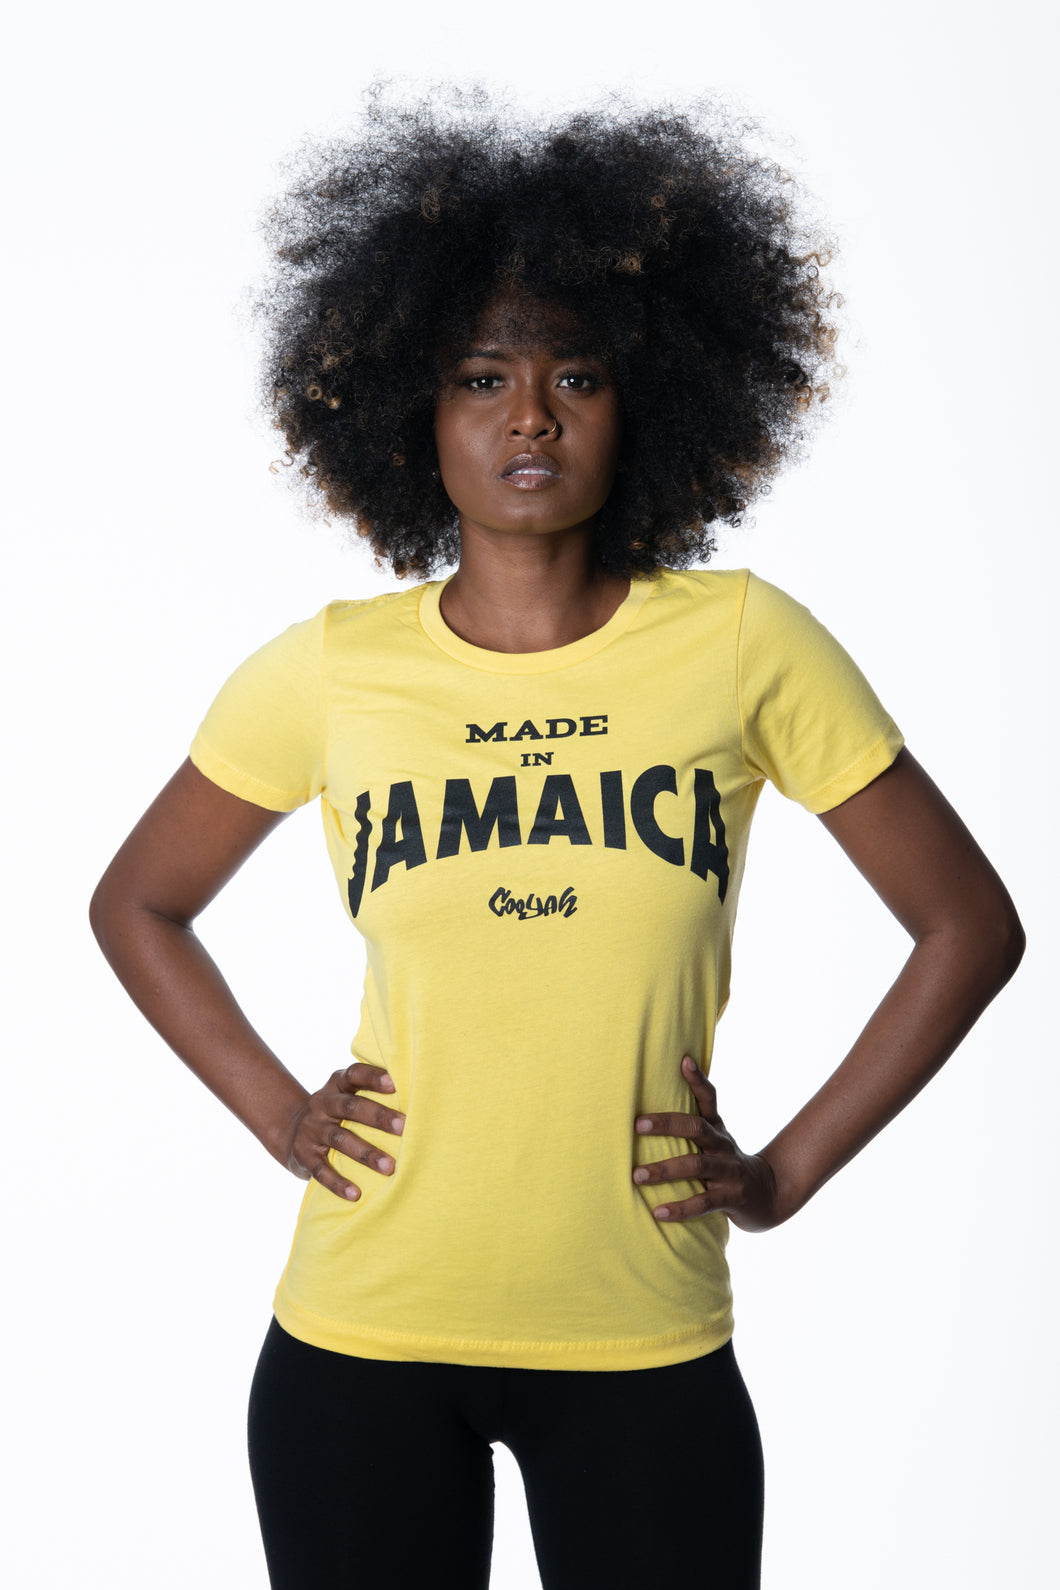 Cooyah Made in Jamaica women's fitted t-shirt with black graphic screen printed on the front.